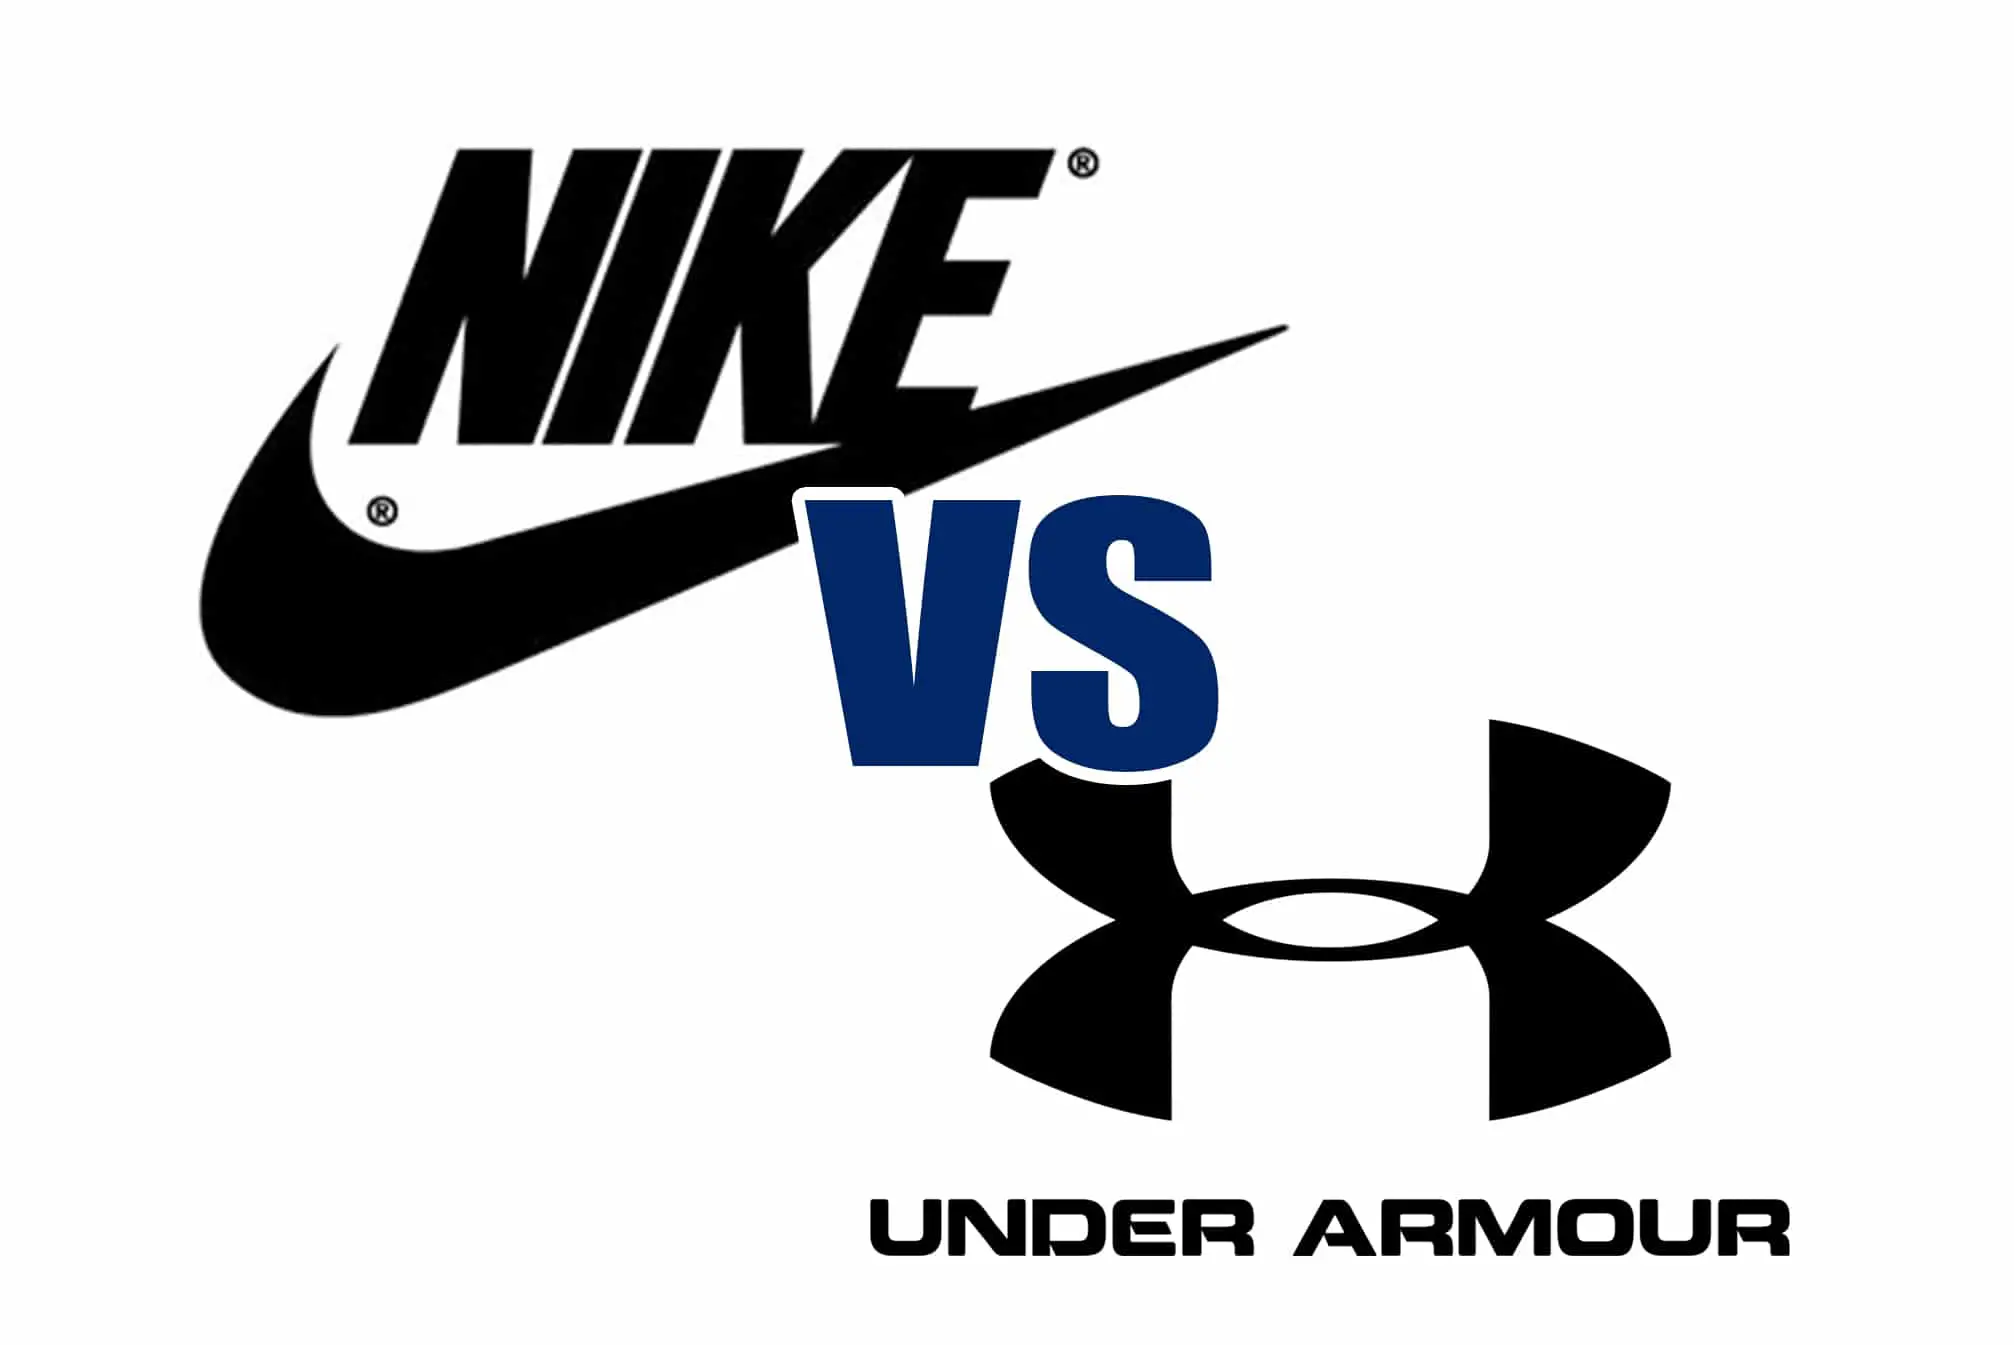 under armour sizing compared to nike